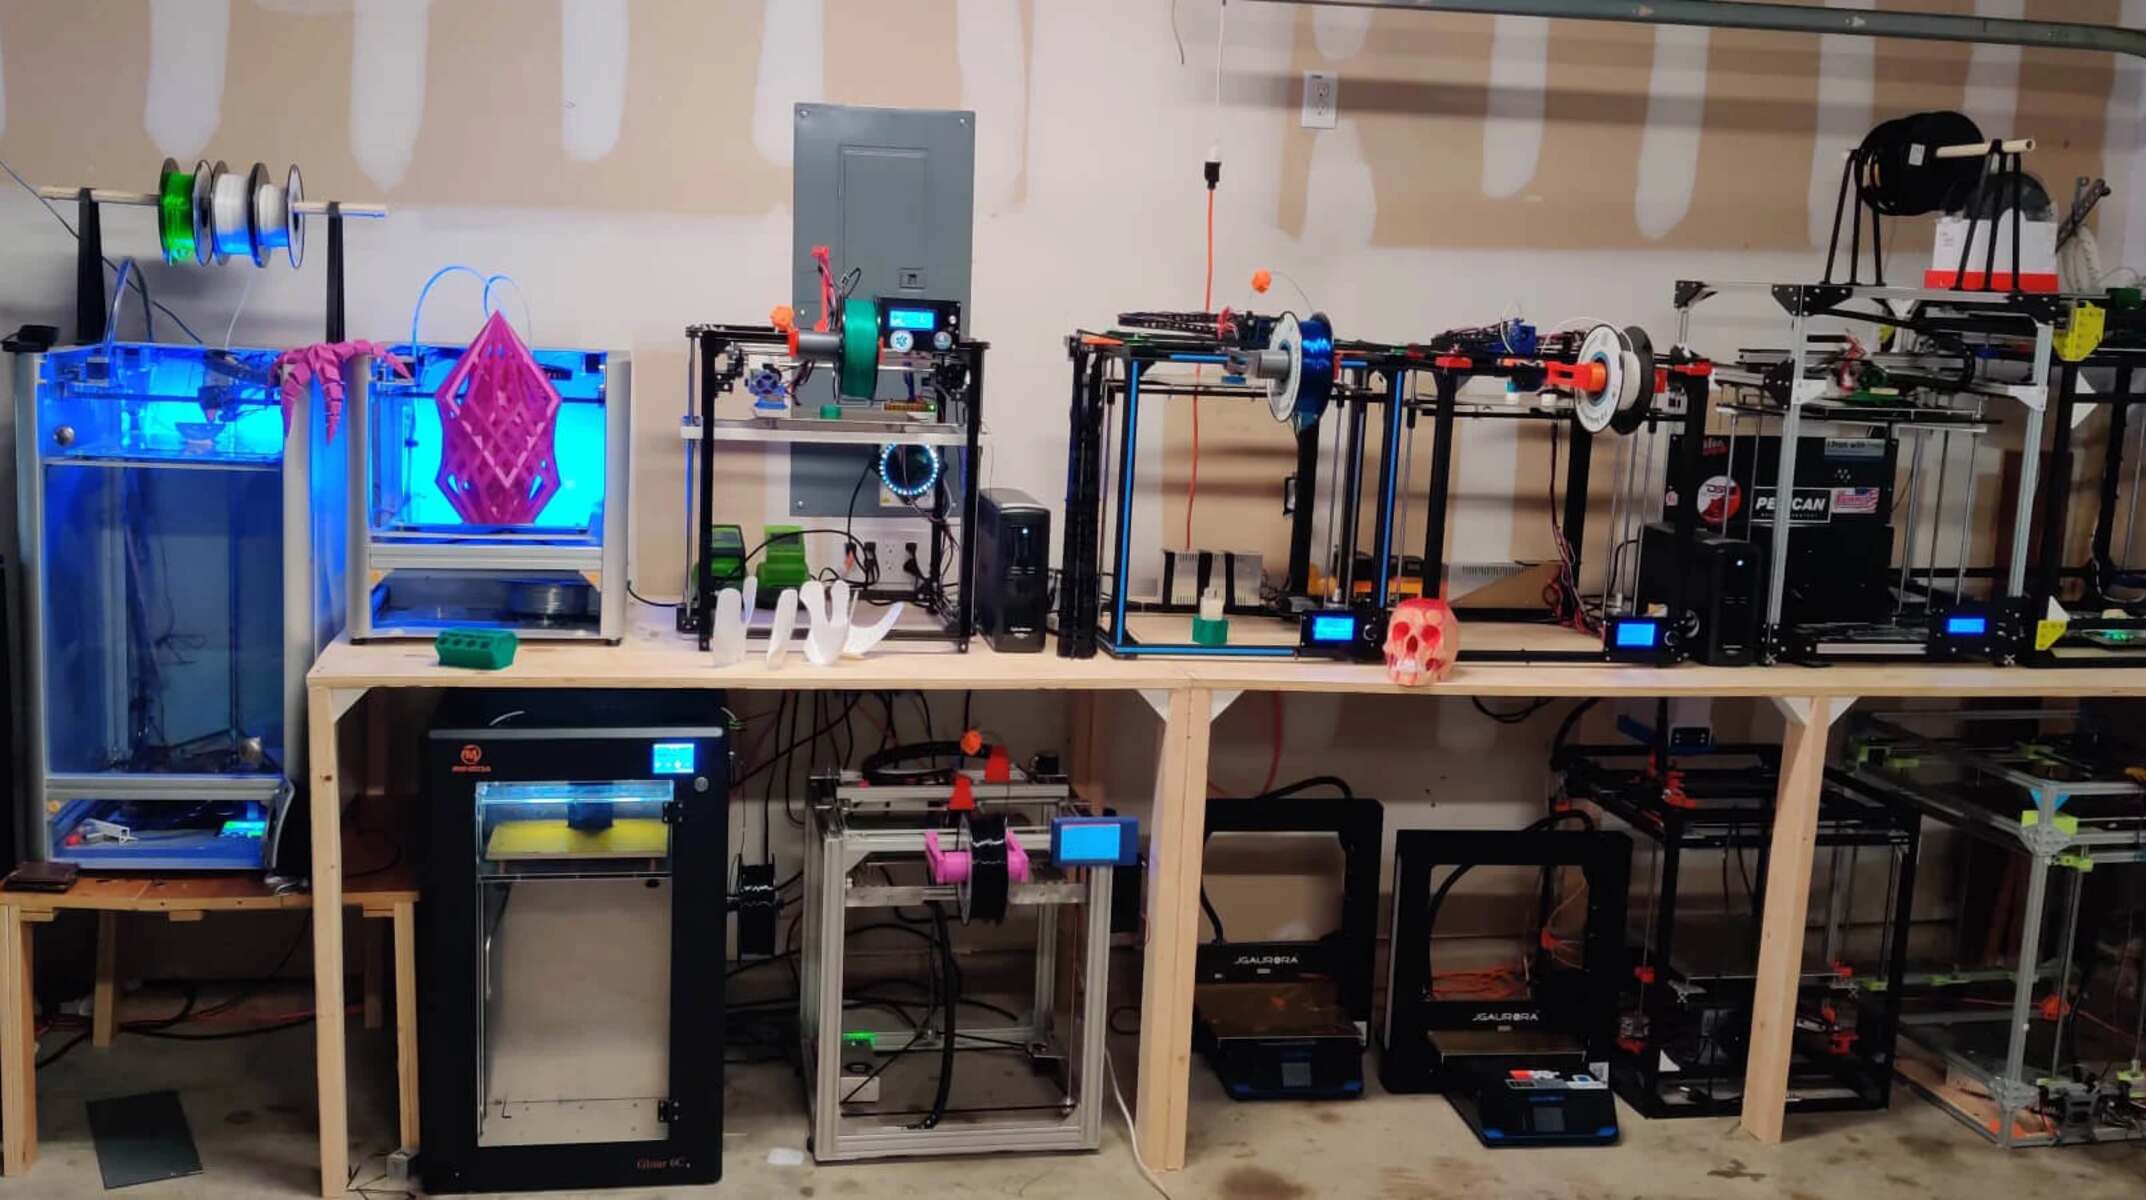 What Business Can You Start With A 3D Printer